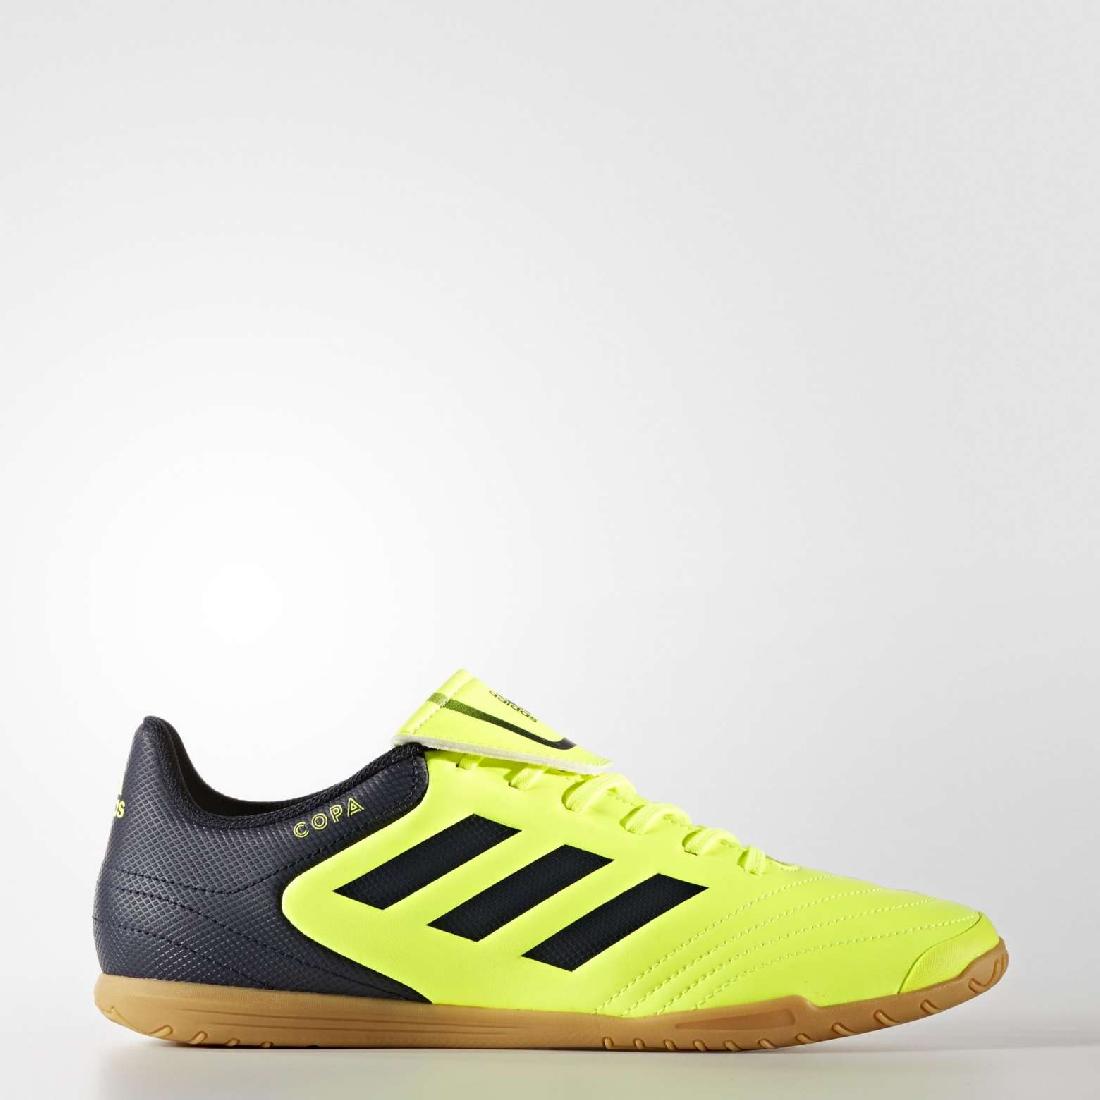  .  / ADIDAS Copa 17.4 IN S77151    